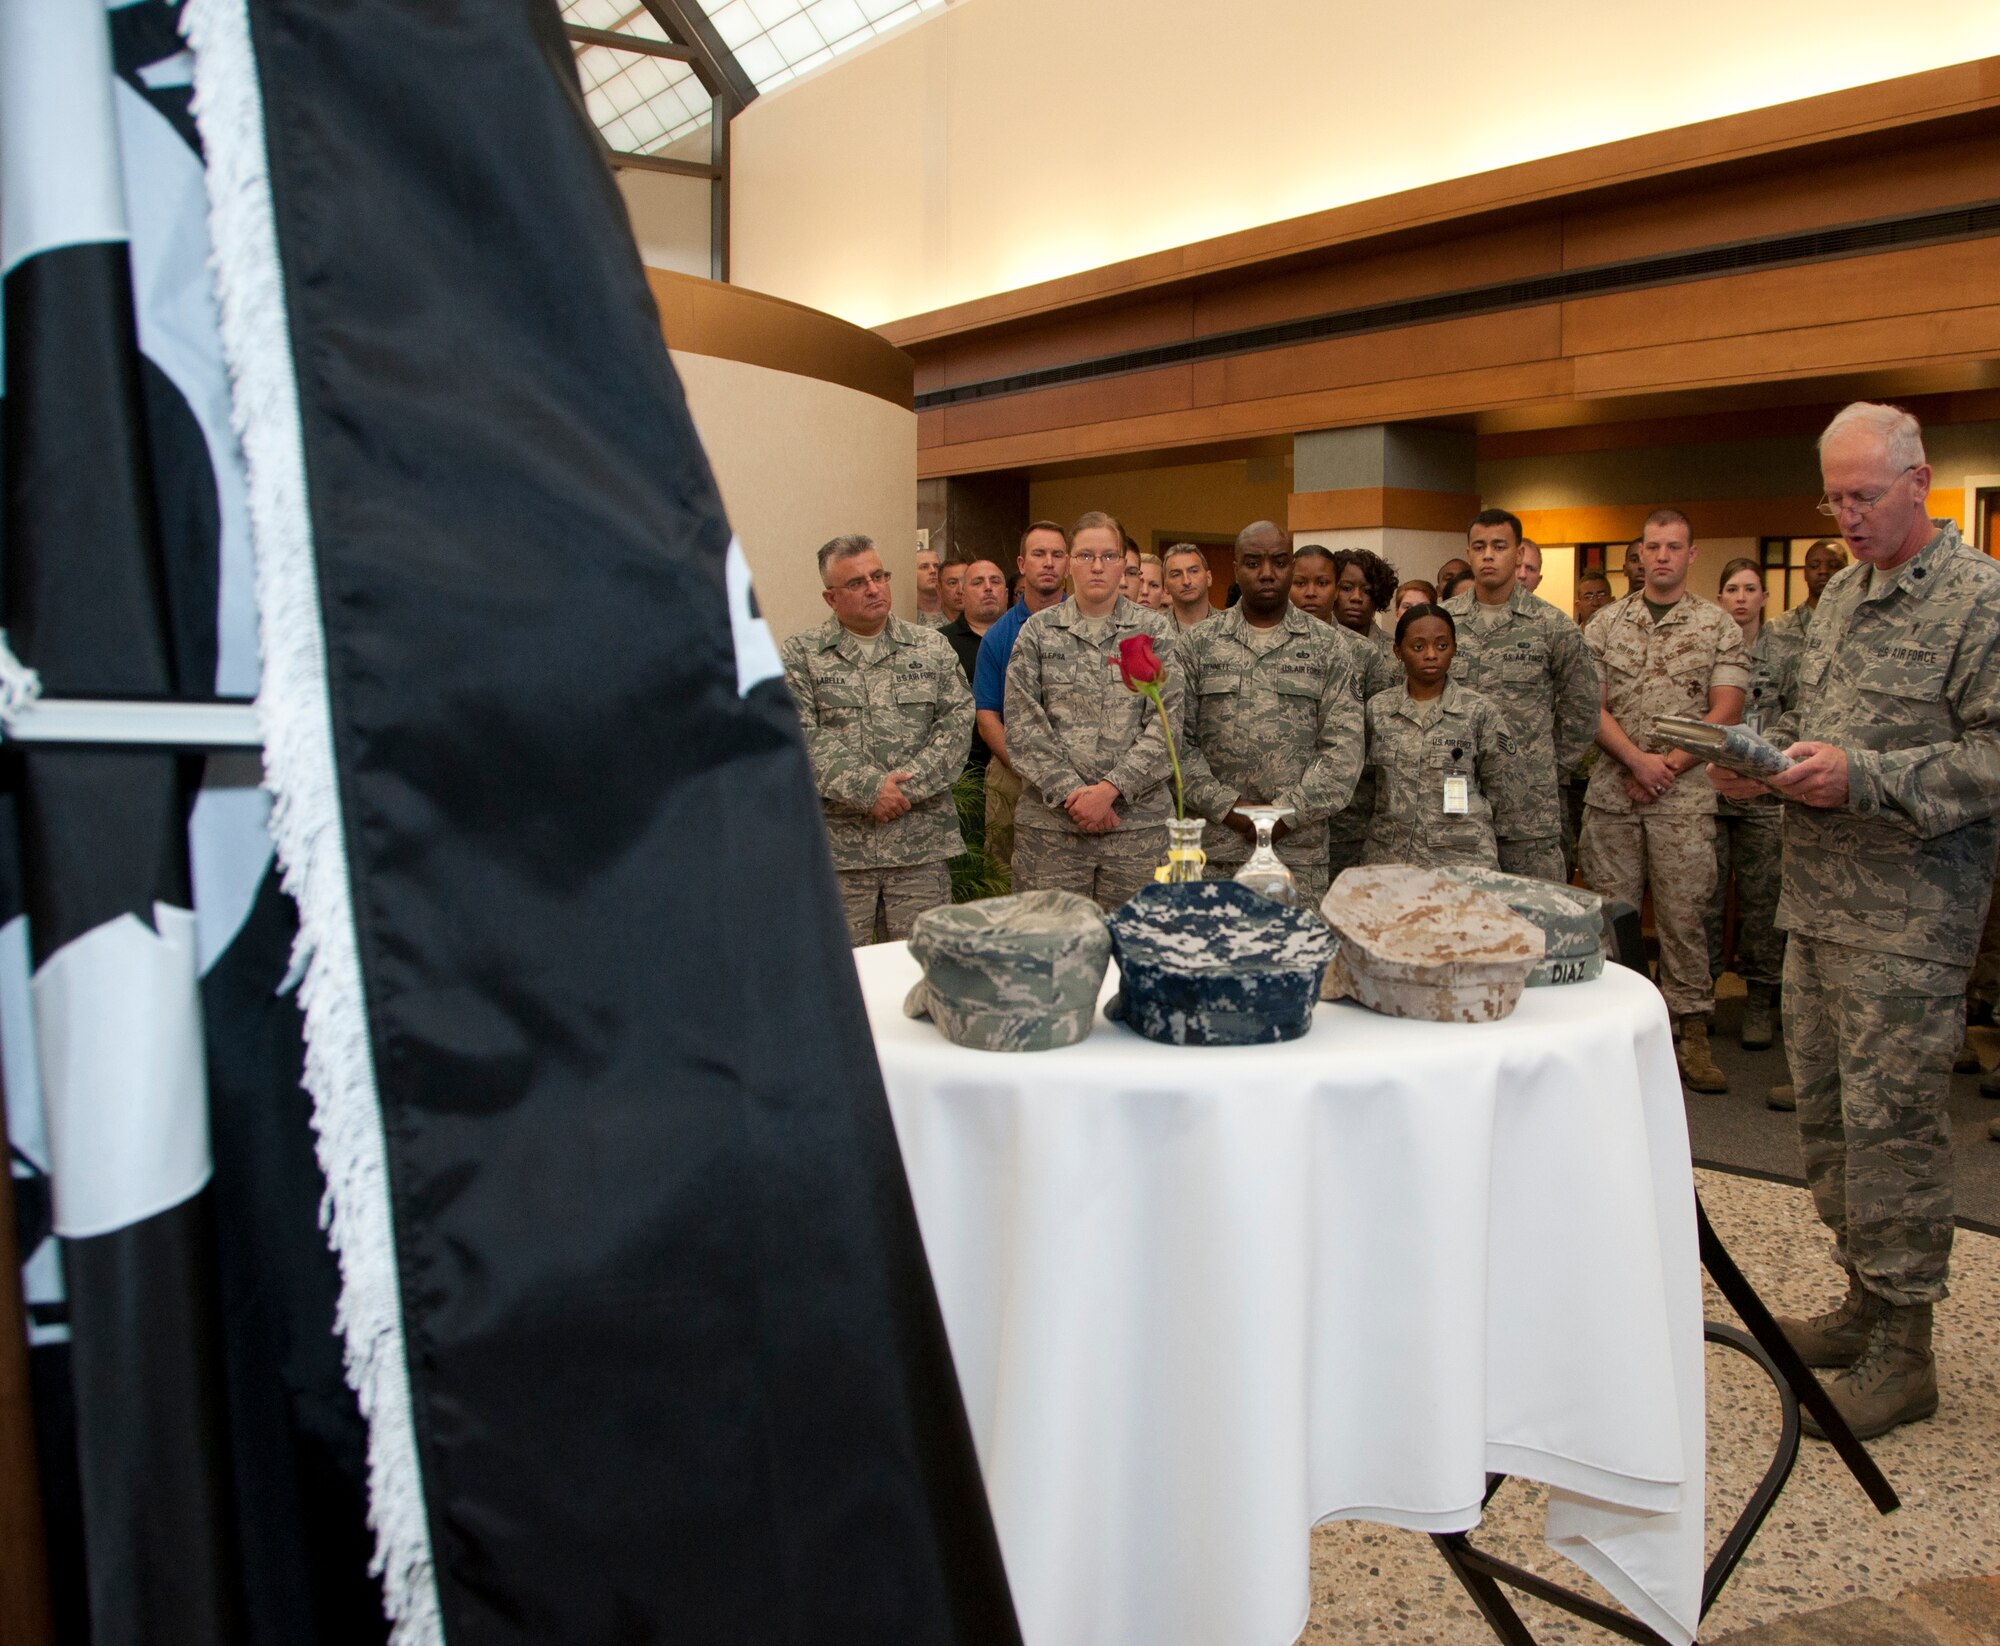 Lt. Col. David Allen (far right), an Air Force Mortuary Affairs Operations chaplain, delivers a speech regarding the symbolism displayed on a table honoring prisoners of war and missing in action servicemembers during a Sept. 23 ceremony inside the Atrium. The glass was inverted for the thousands of MIA servicemembers who could not toast on this occasion. (U.S. Air Force photo by Augustine G. Salazar)